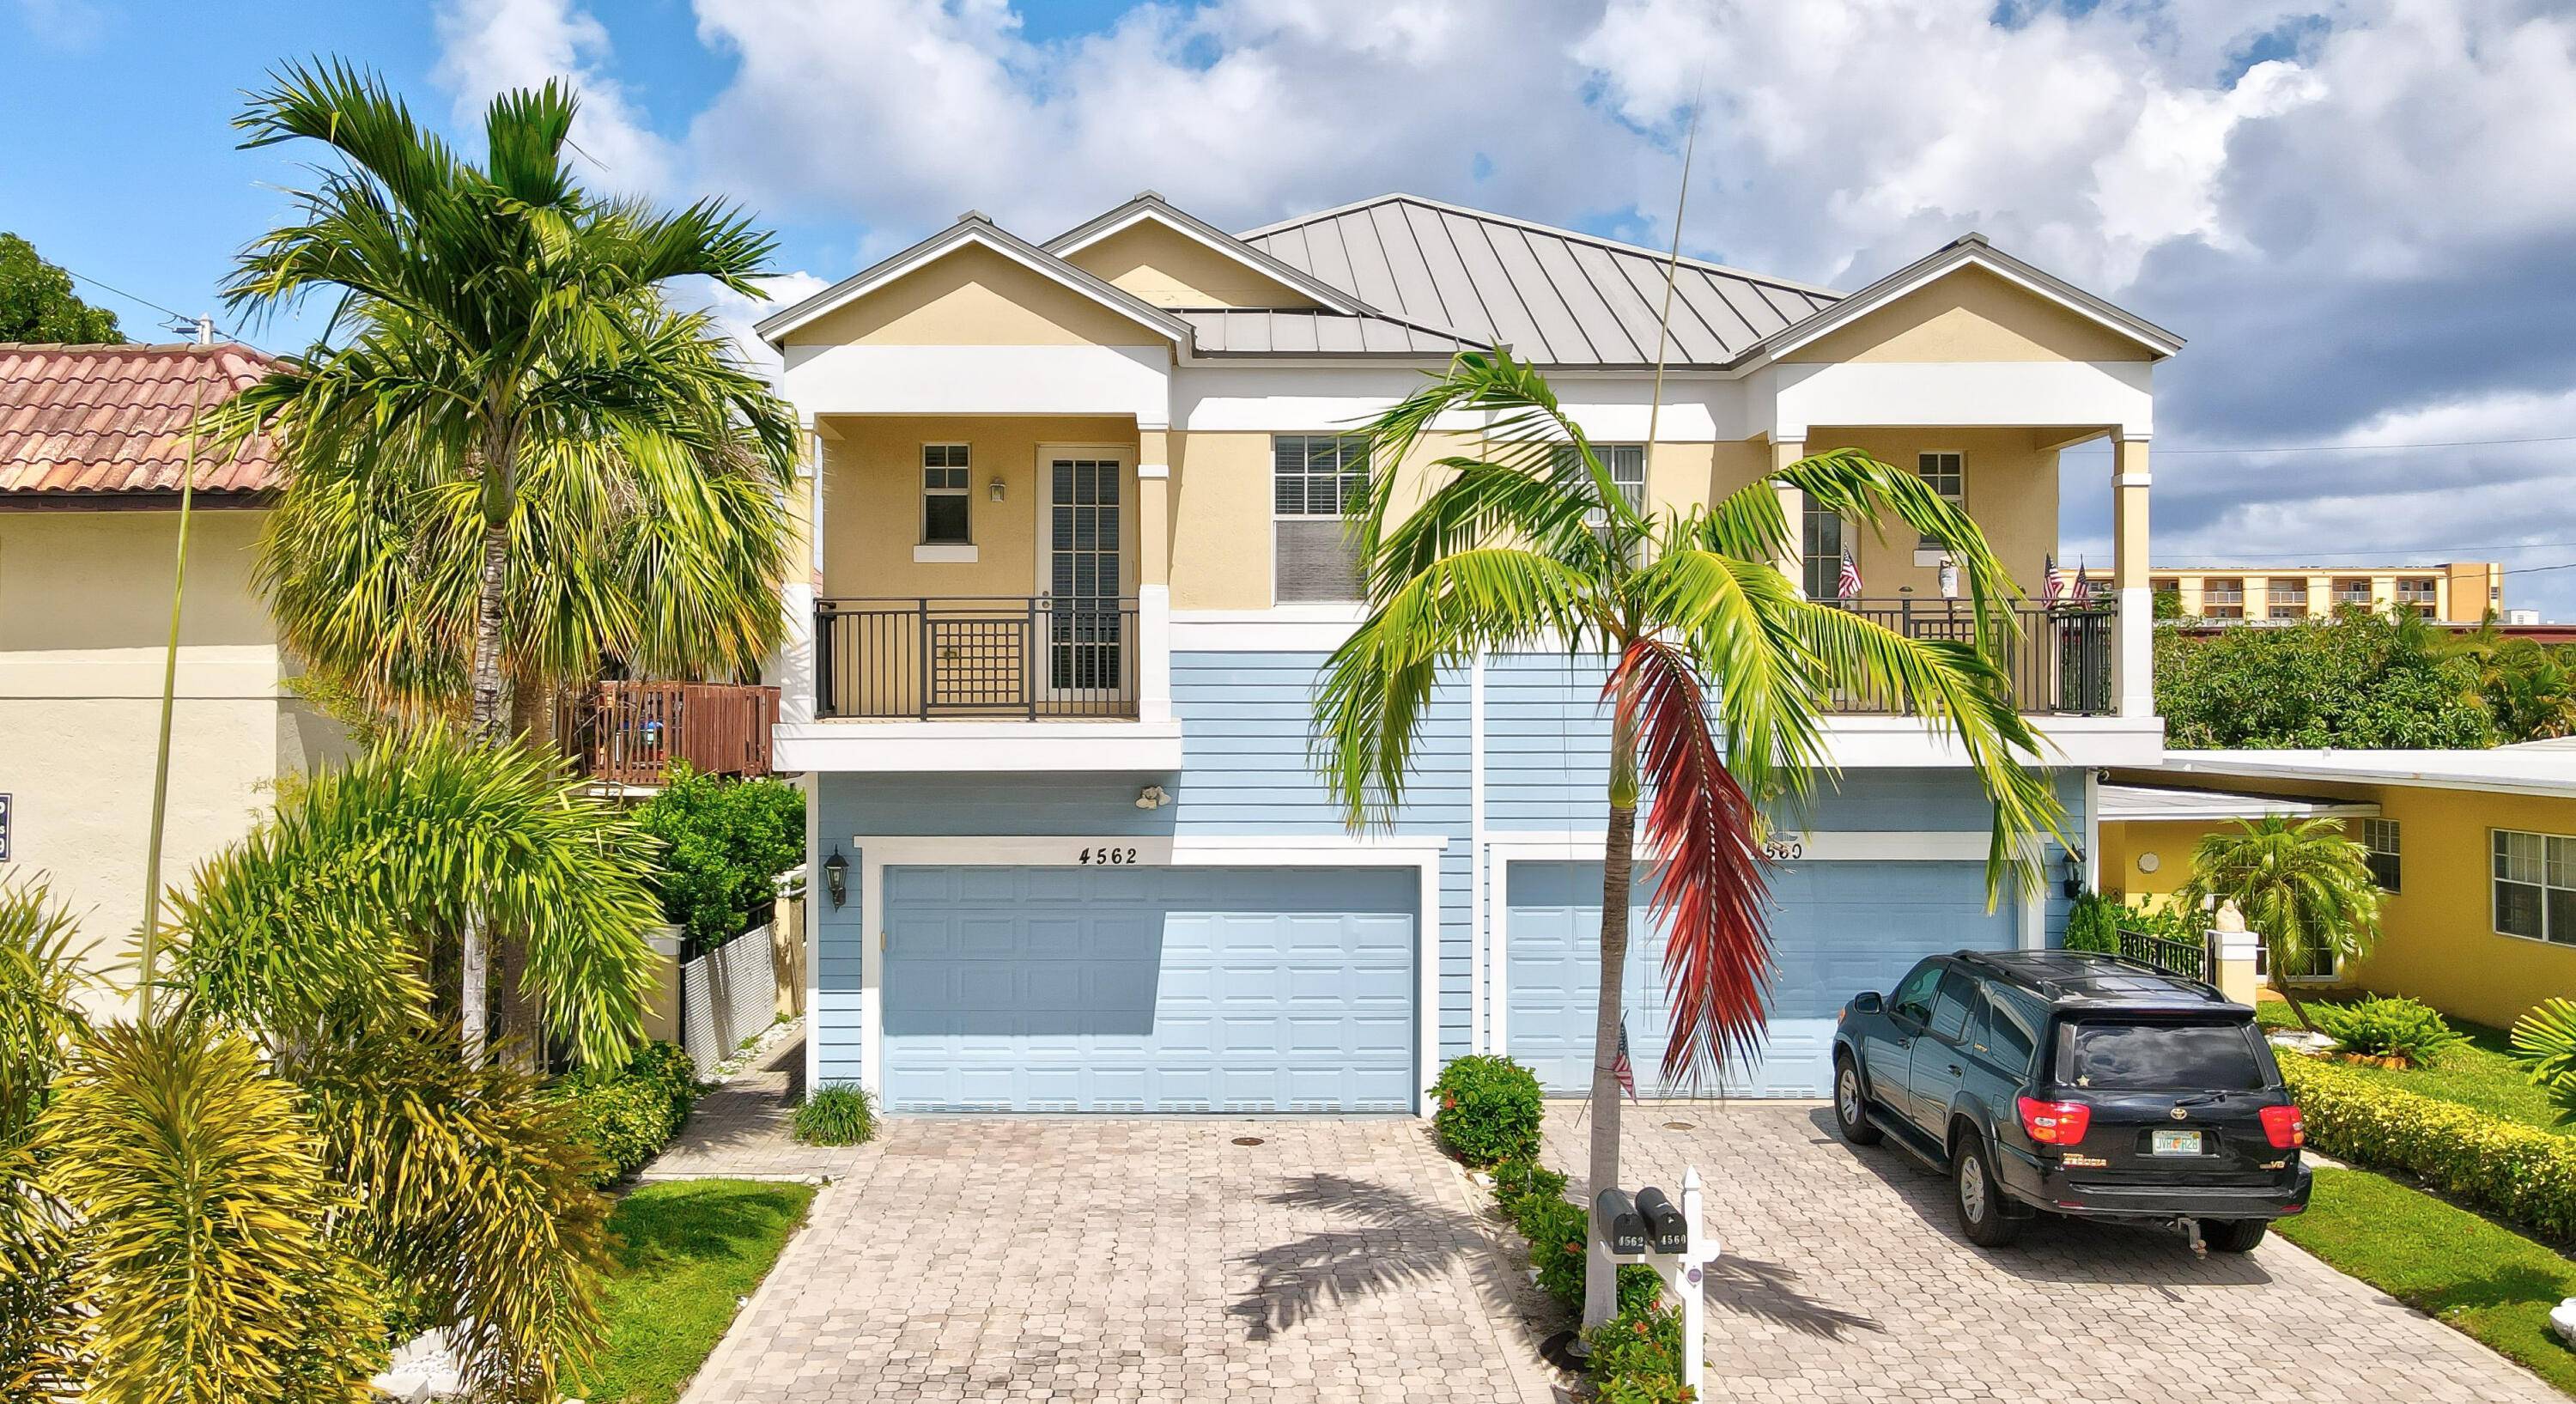 LOCATED 2 BLOCKS FROM THE BEAUTIFUL LAUDERDALE BY THE SEA BEACH, this gorgeous, fully furnished 3 bedroom each with own bathroom, single family attached home is available Dec.